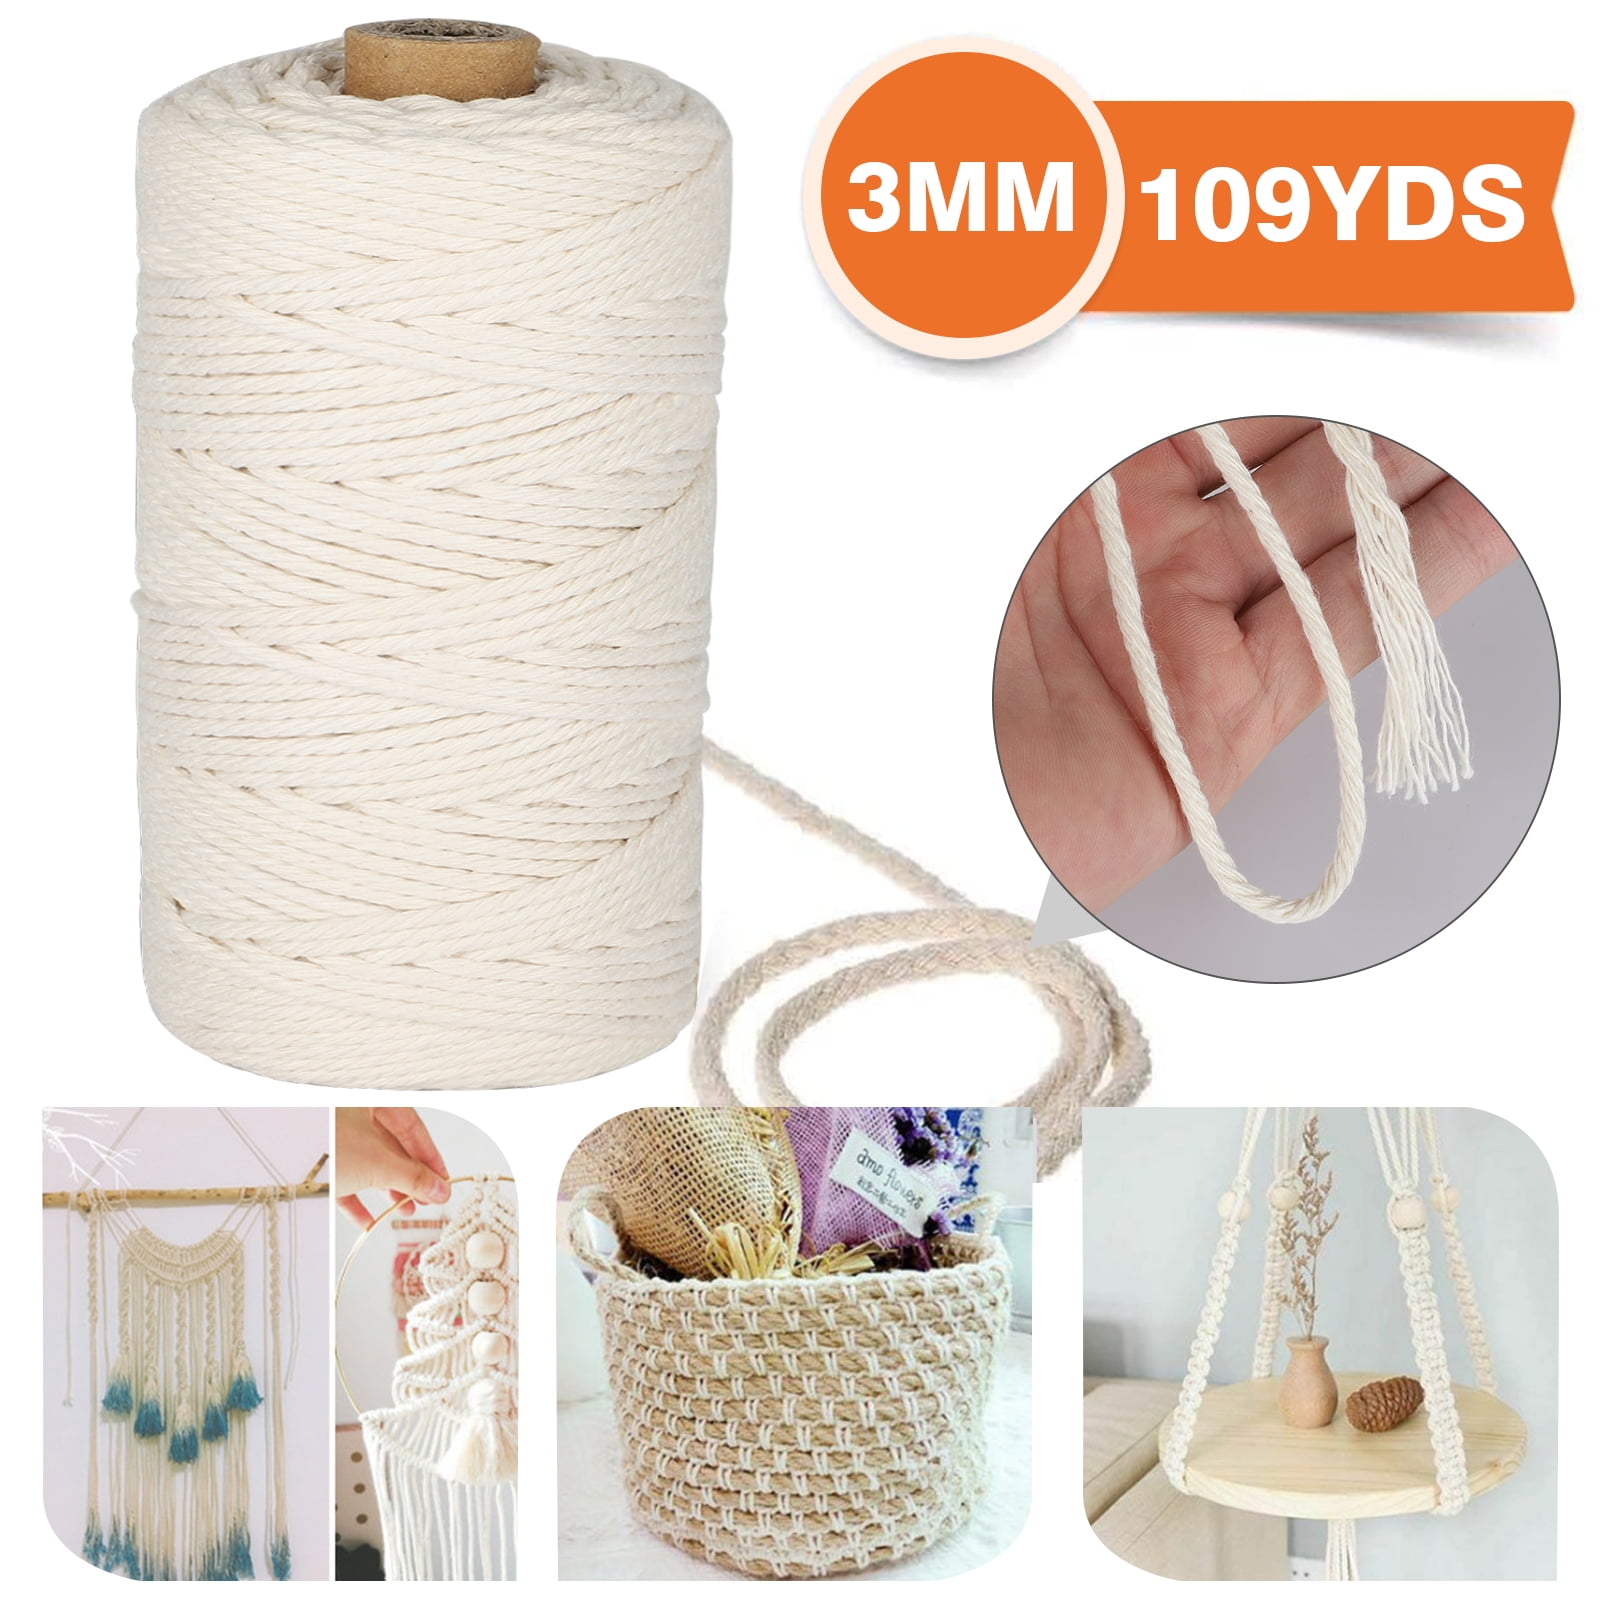 Blisstime Macrame Cord 3mm X 500Yards |Natural Cotton Macrame Rope|3 Strand Twisted Cotton Cord Decorative Projects Knitting Soft Undyed Cotton Rope for Wall Hangings Crafts Plant Hangers